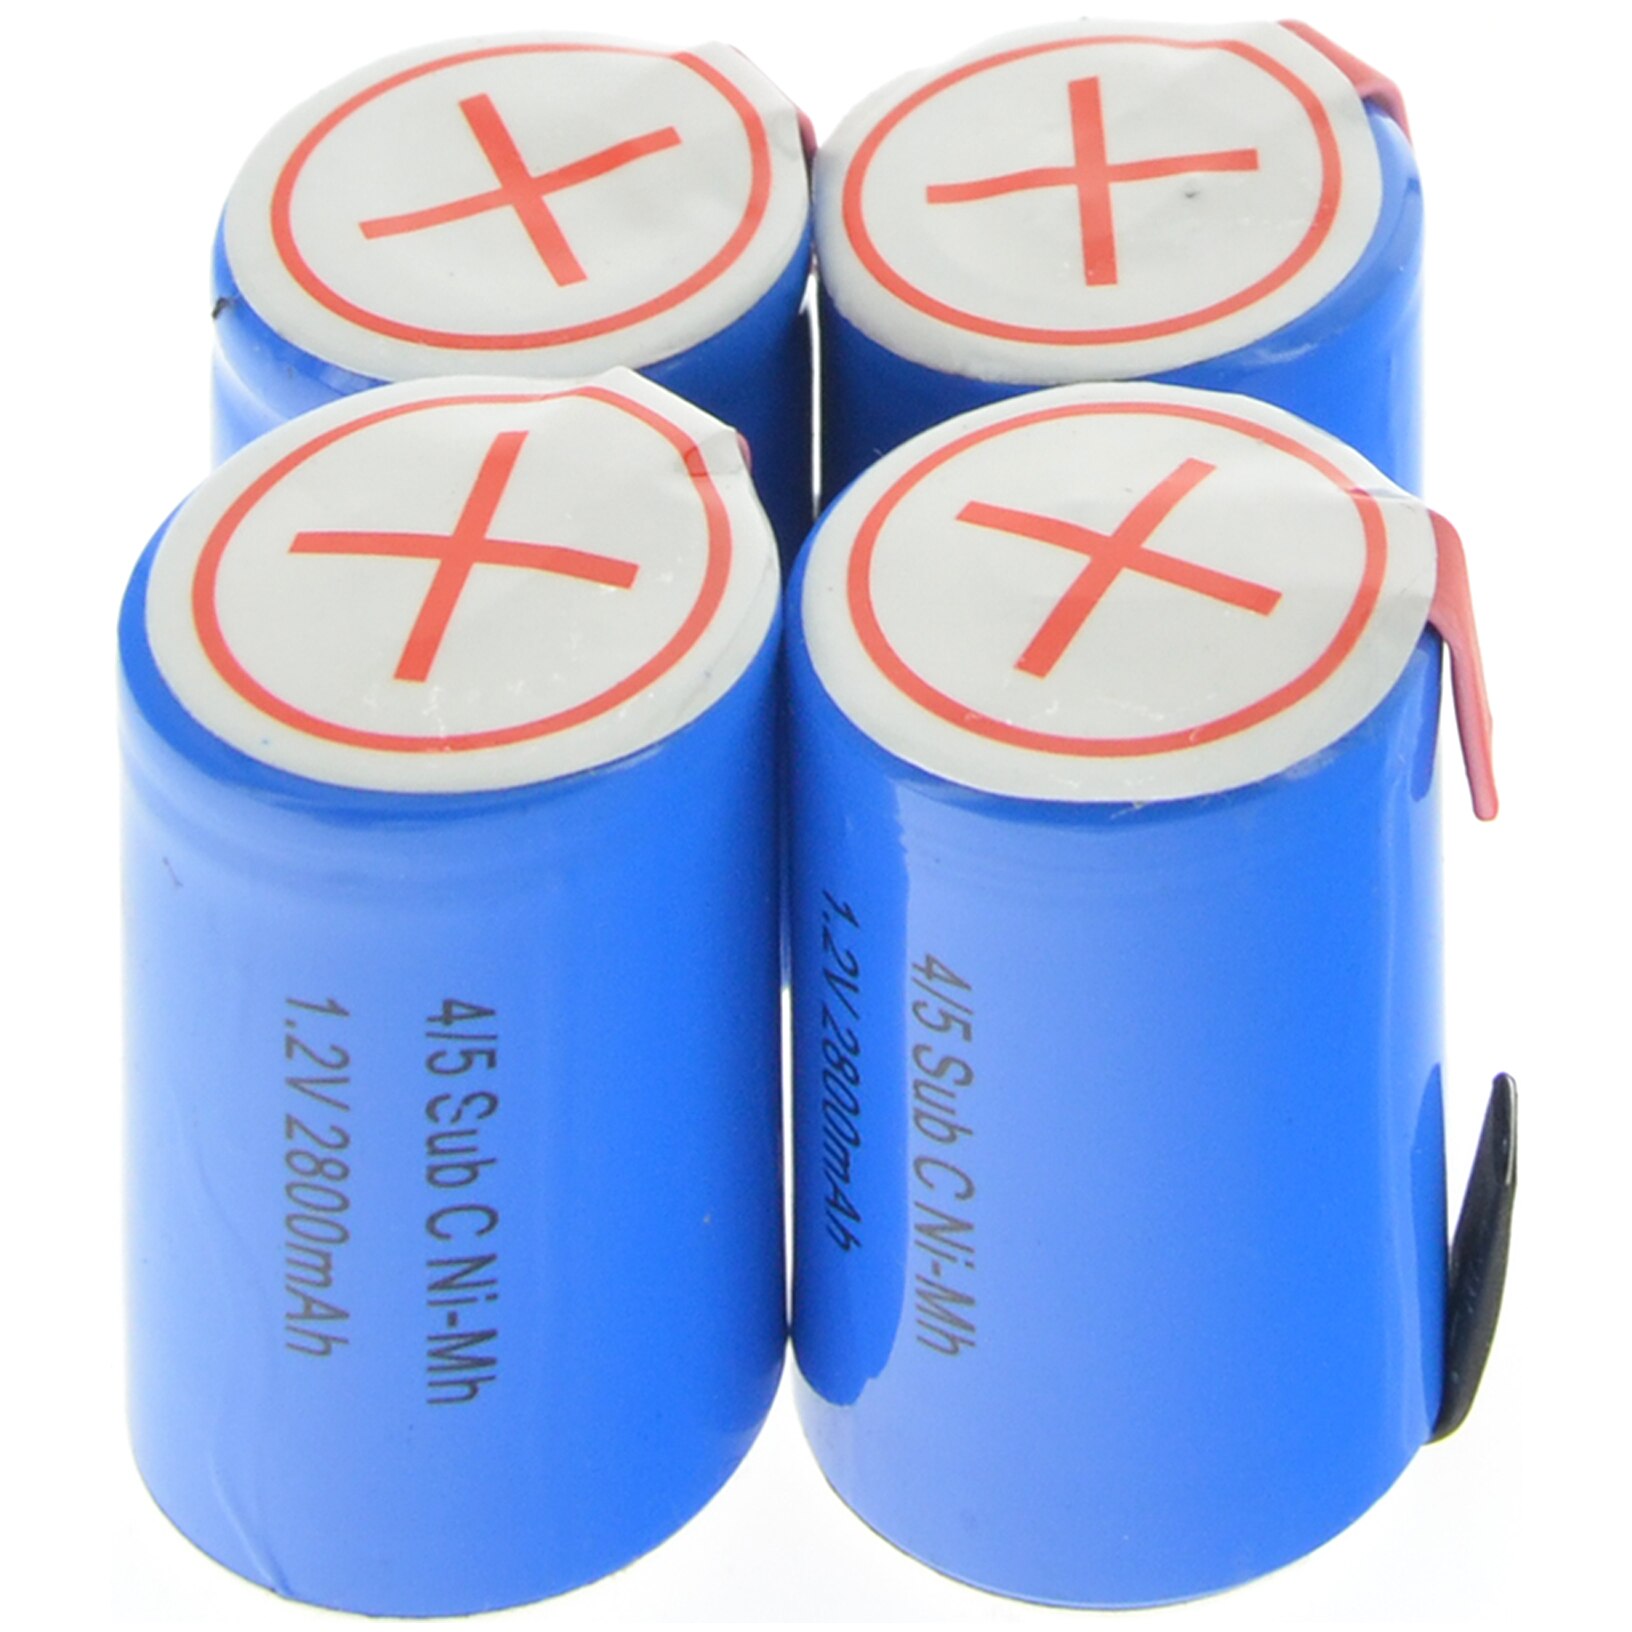 2/4/8/12/16/20pcs 4/5 SubC Sub C 2800mAh 1.2V Ni-Mh Rechargeable Battery Blue Cell with Tab